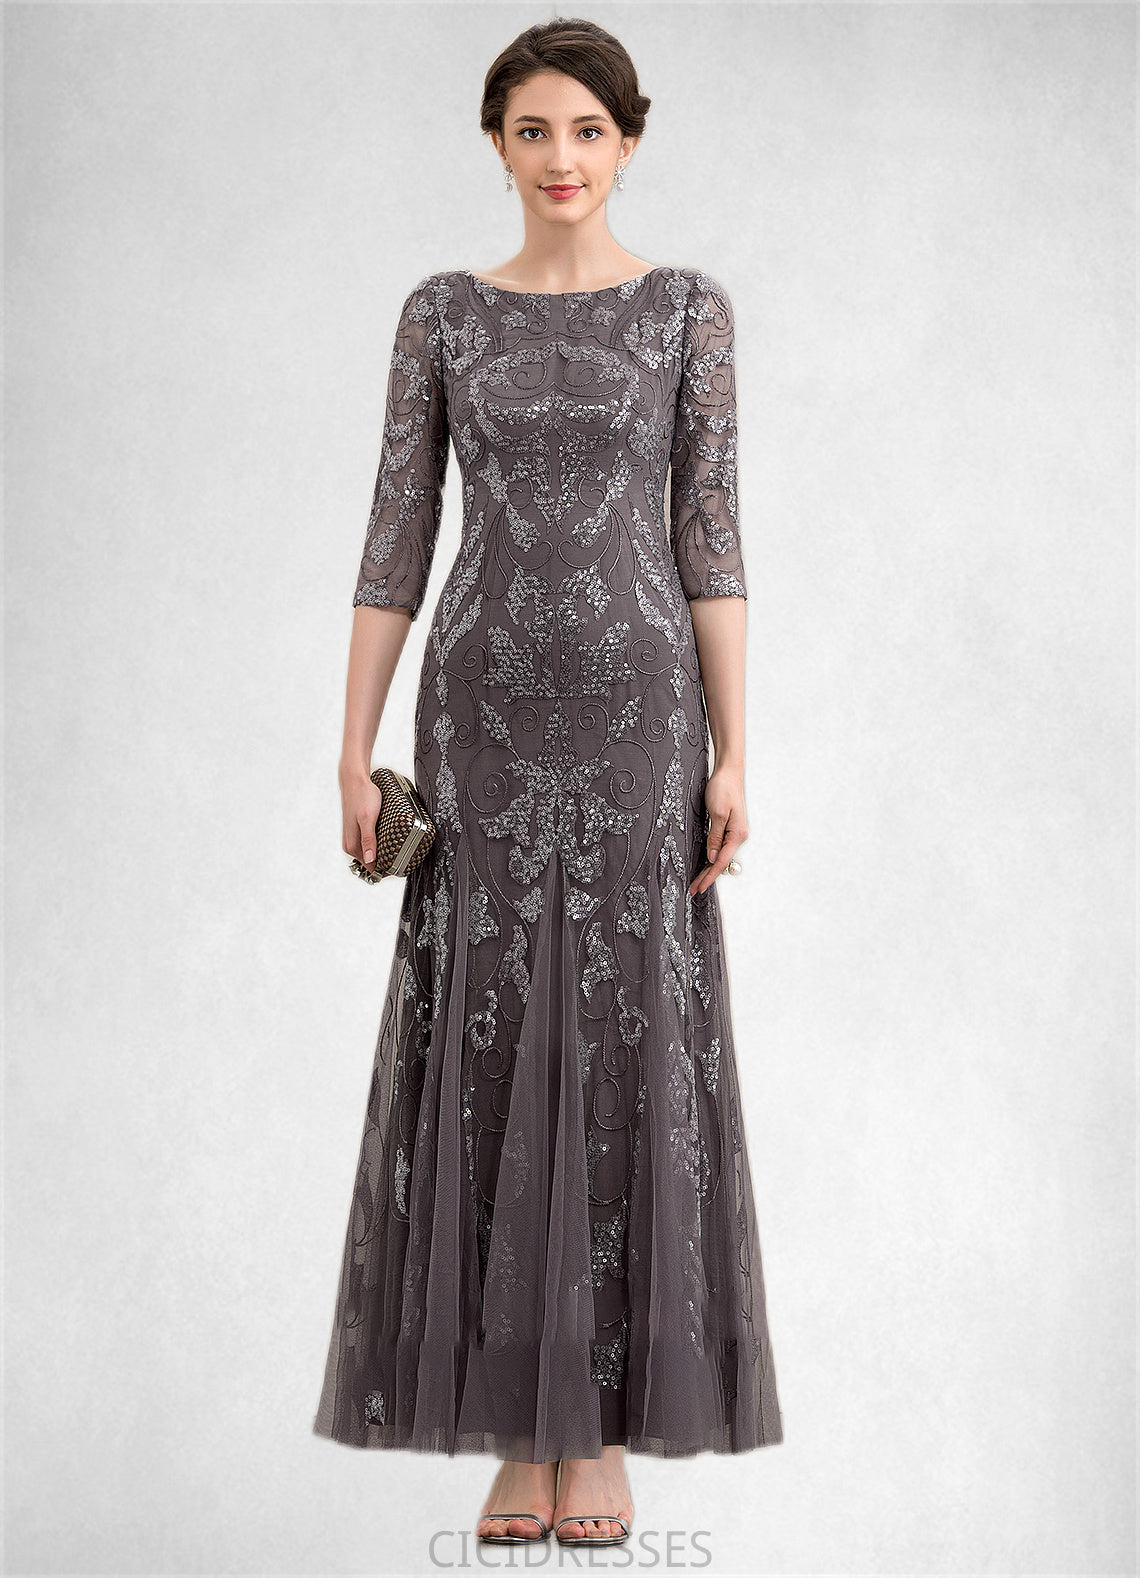 Carolyn Sheath/Column Scoop Neck Ankle-Length Tulle Sequined Mother of the Bride Dress CIC8126P0014758